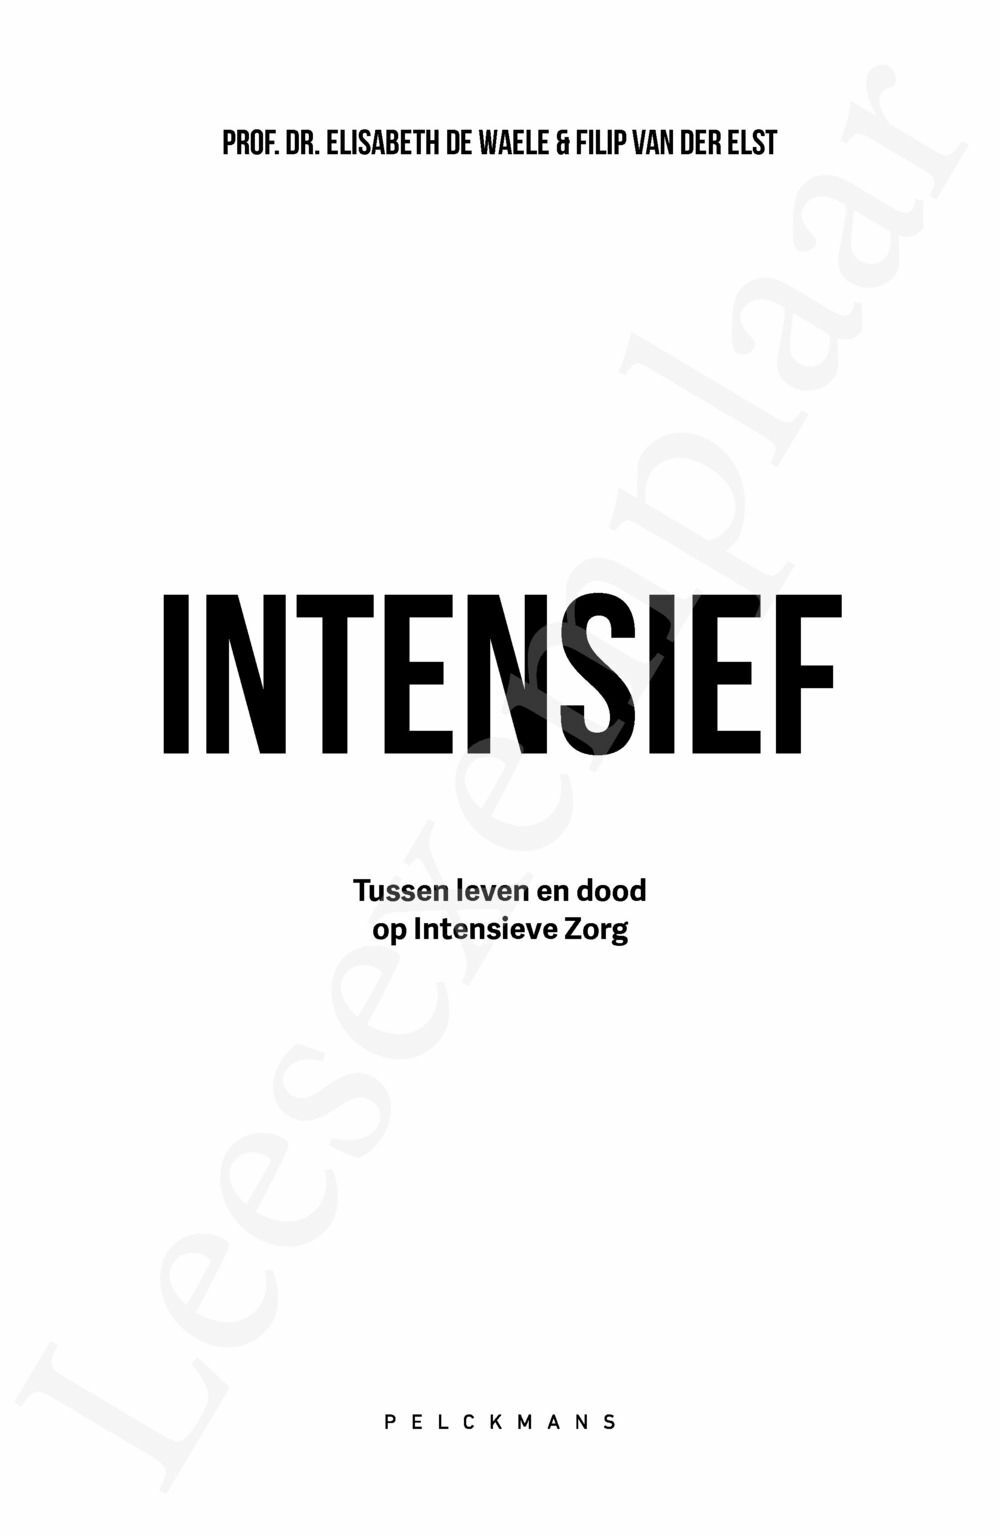 Preview: INTENSIEF